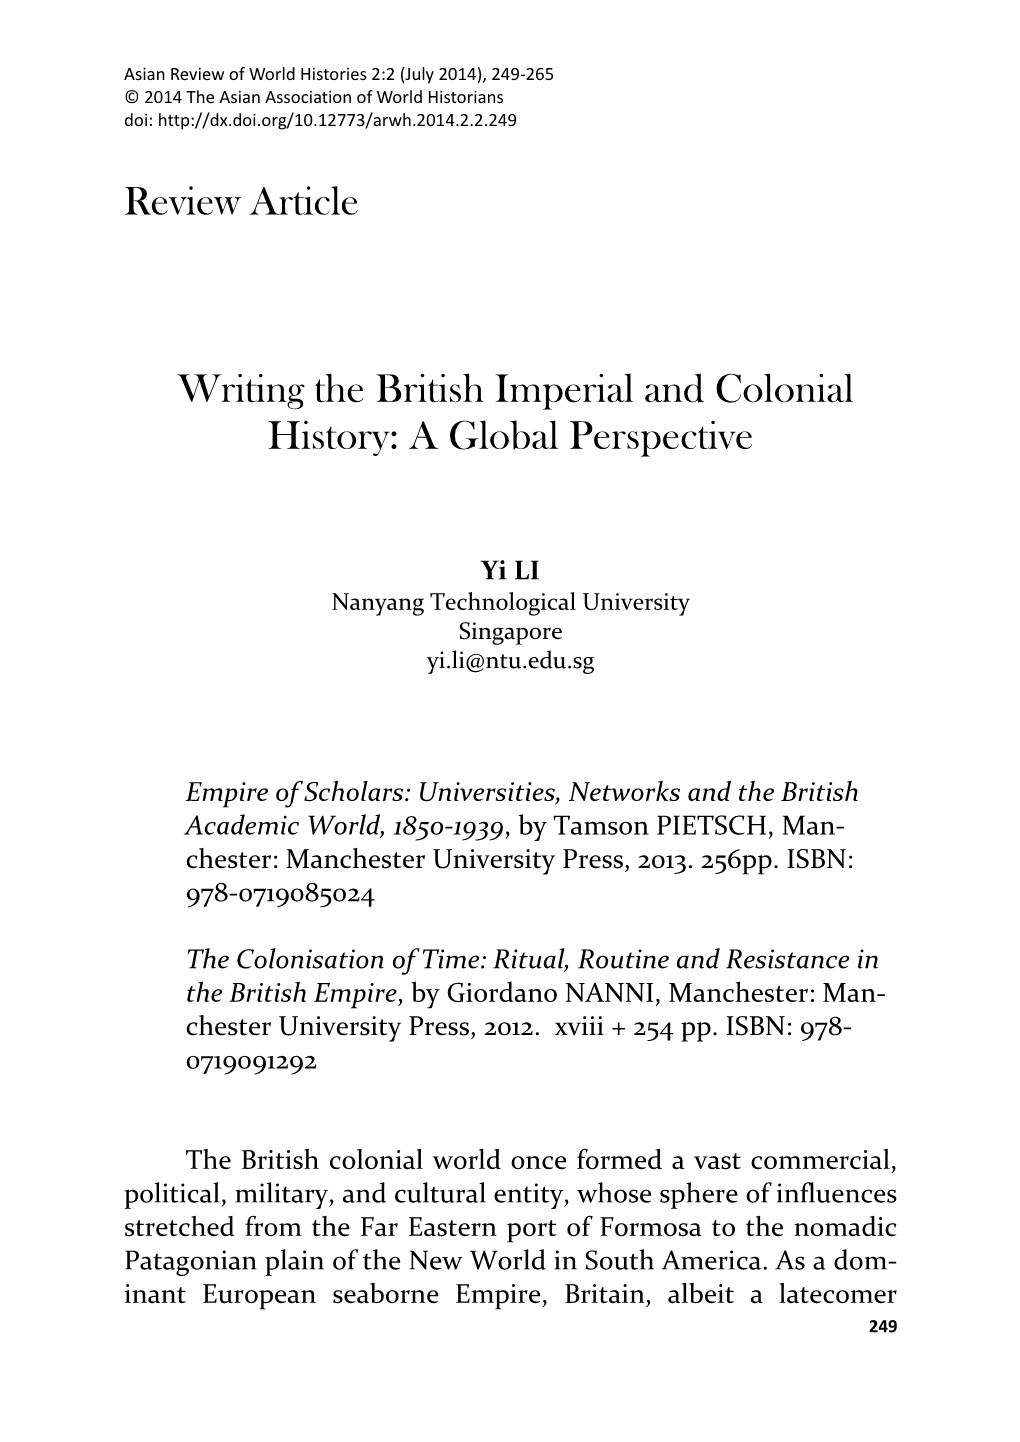 Review Article Writing the British Imperial and Colonial History